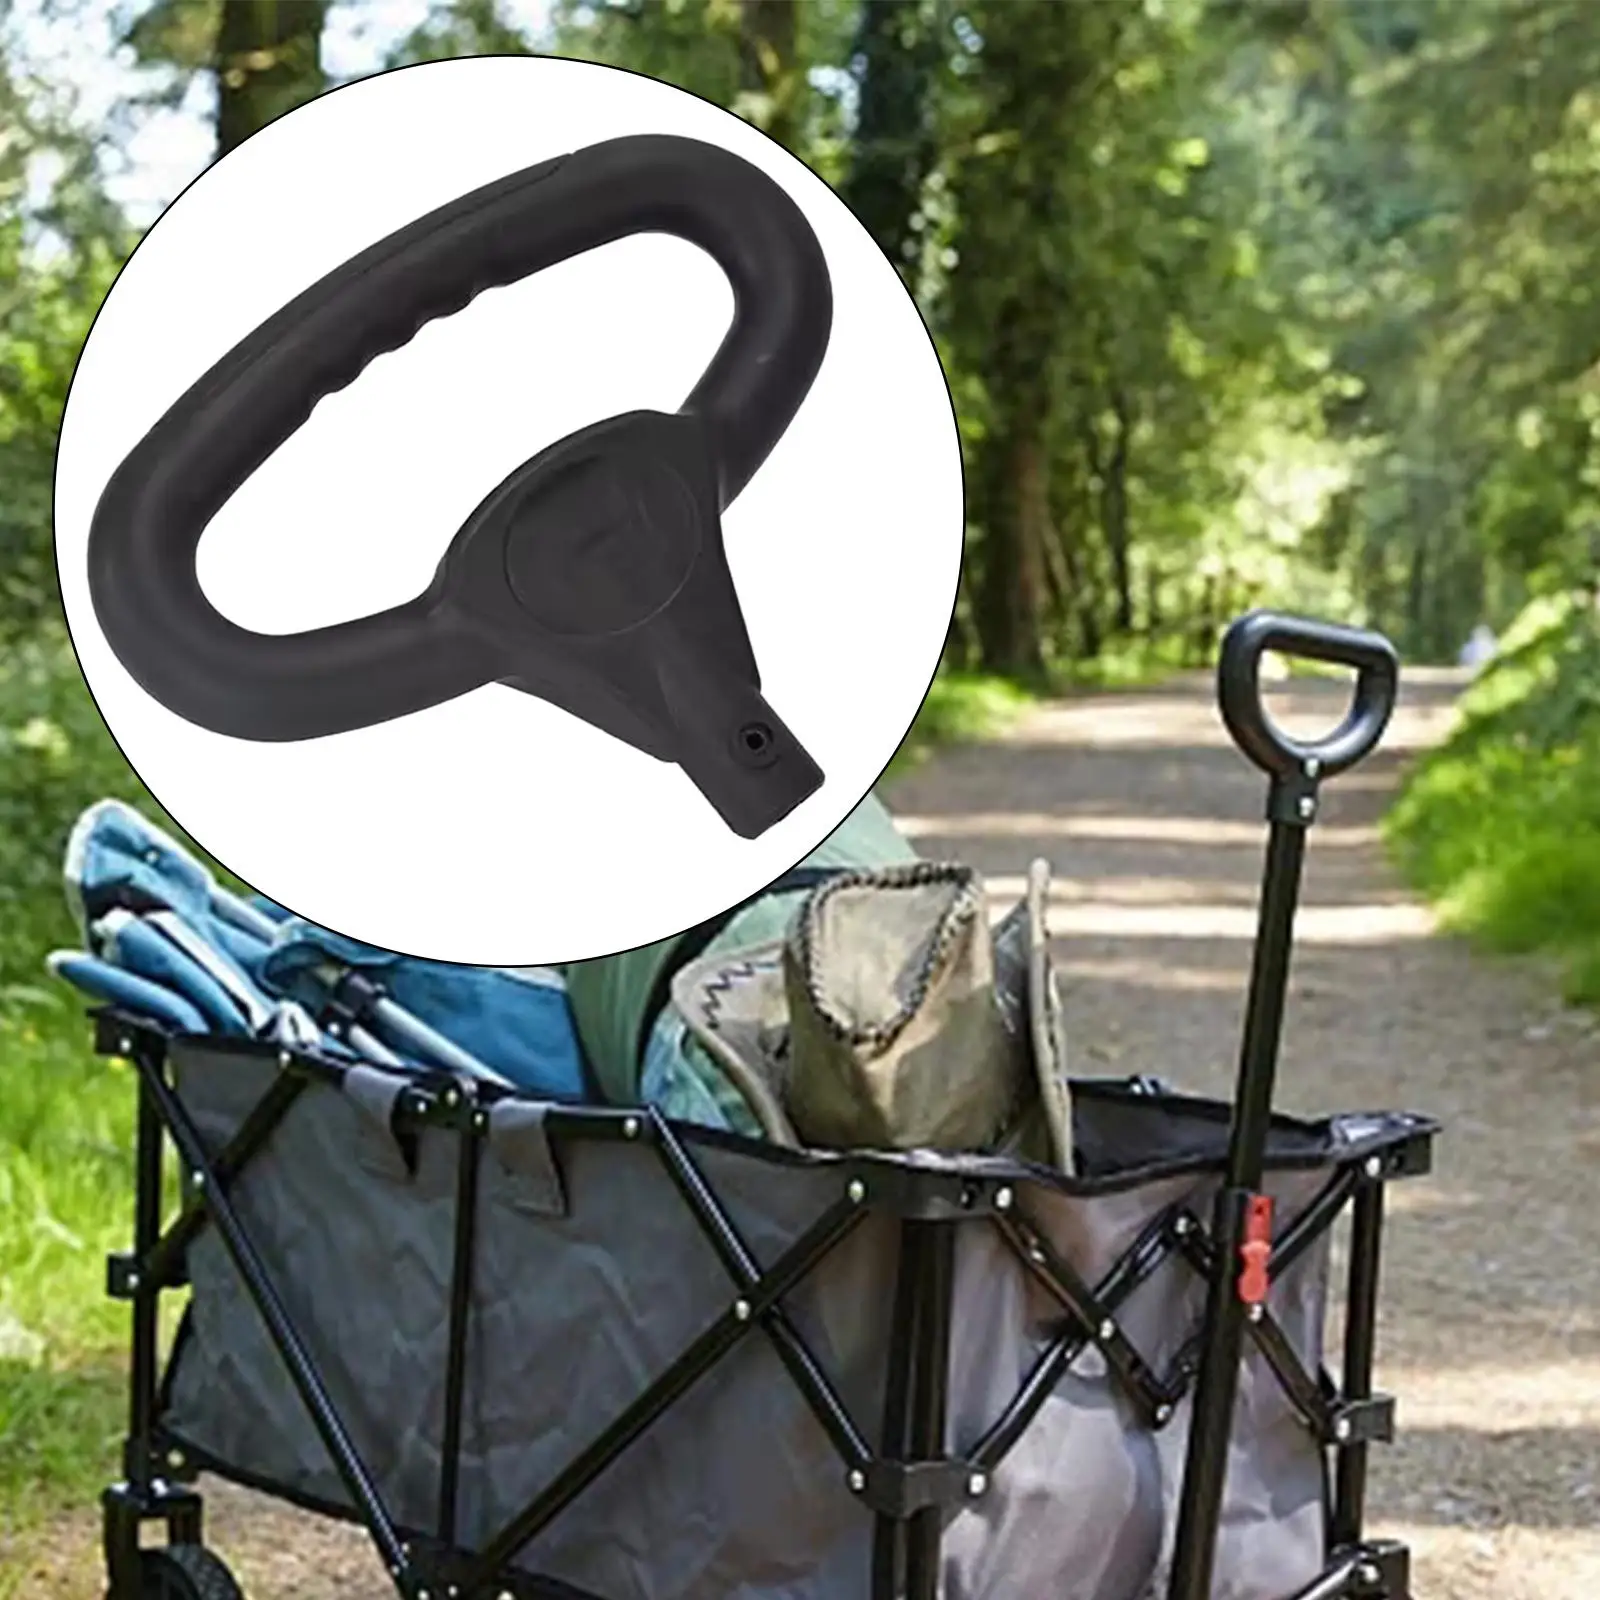 Wagon Cart Push Handle Replacement Accessories Black Portable Comfortable Gripping for Camping Shopping Cart Outdoor Gardening